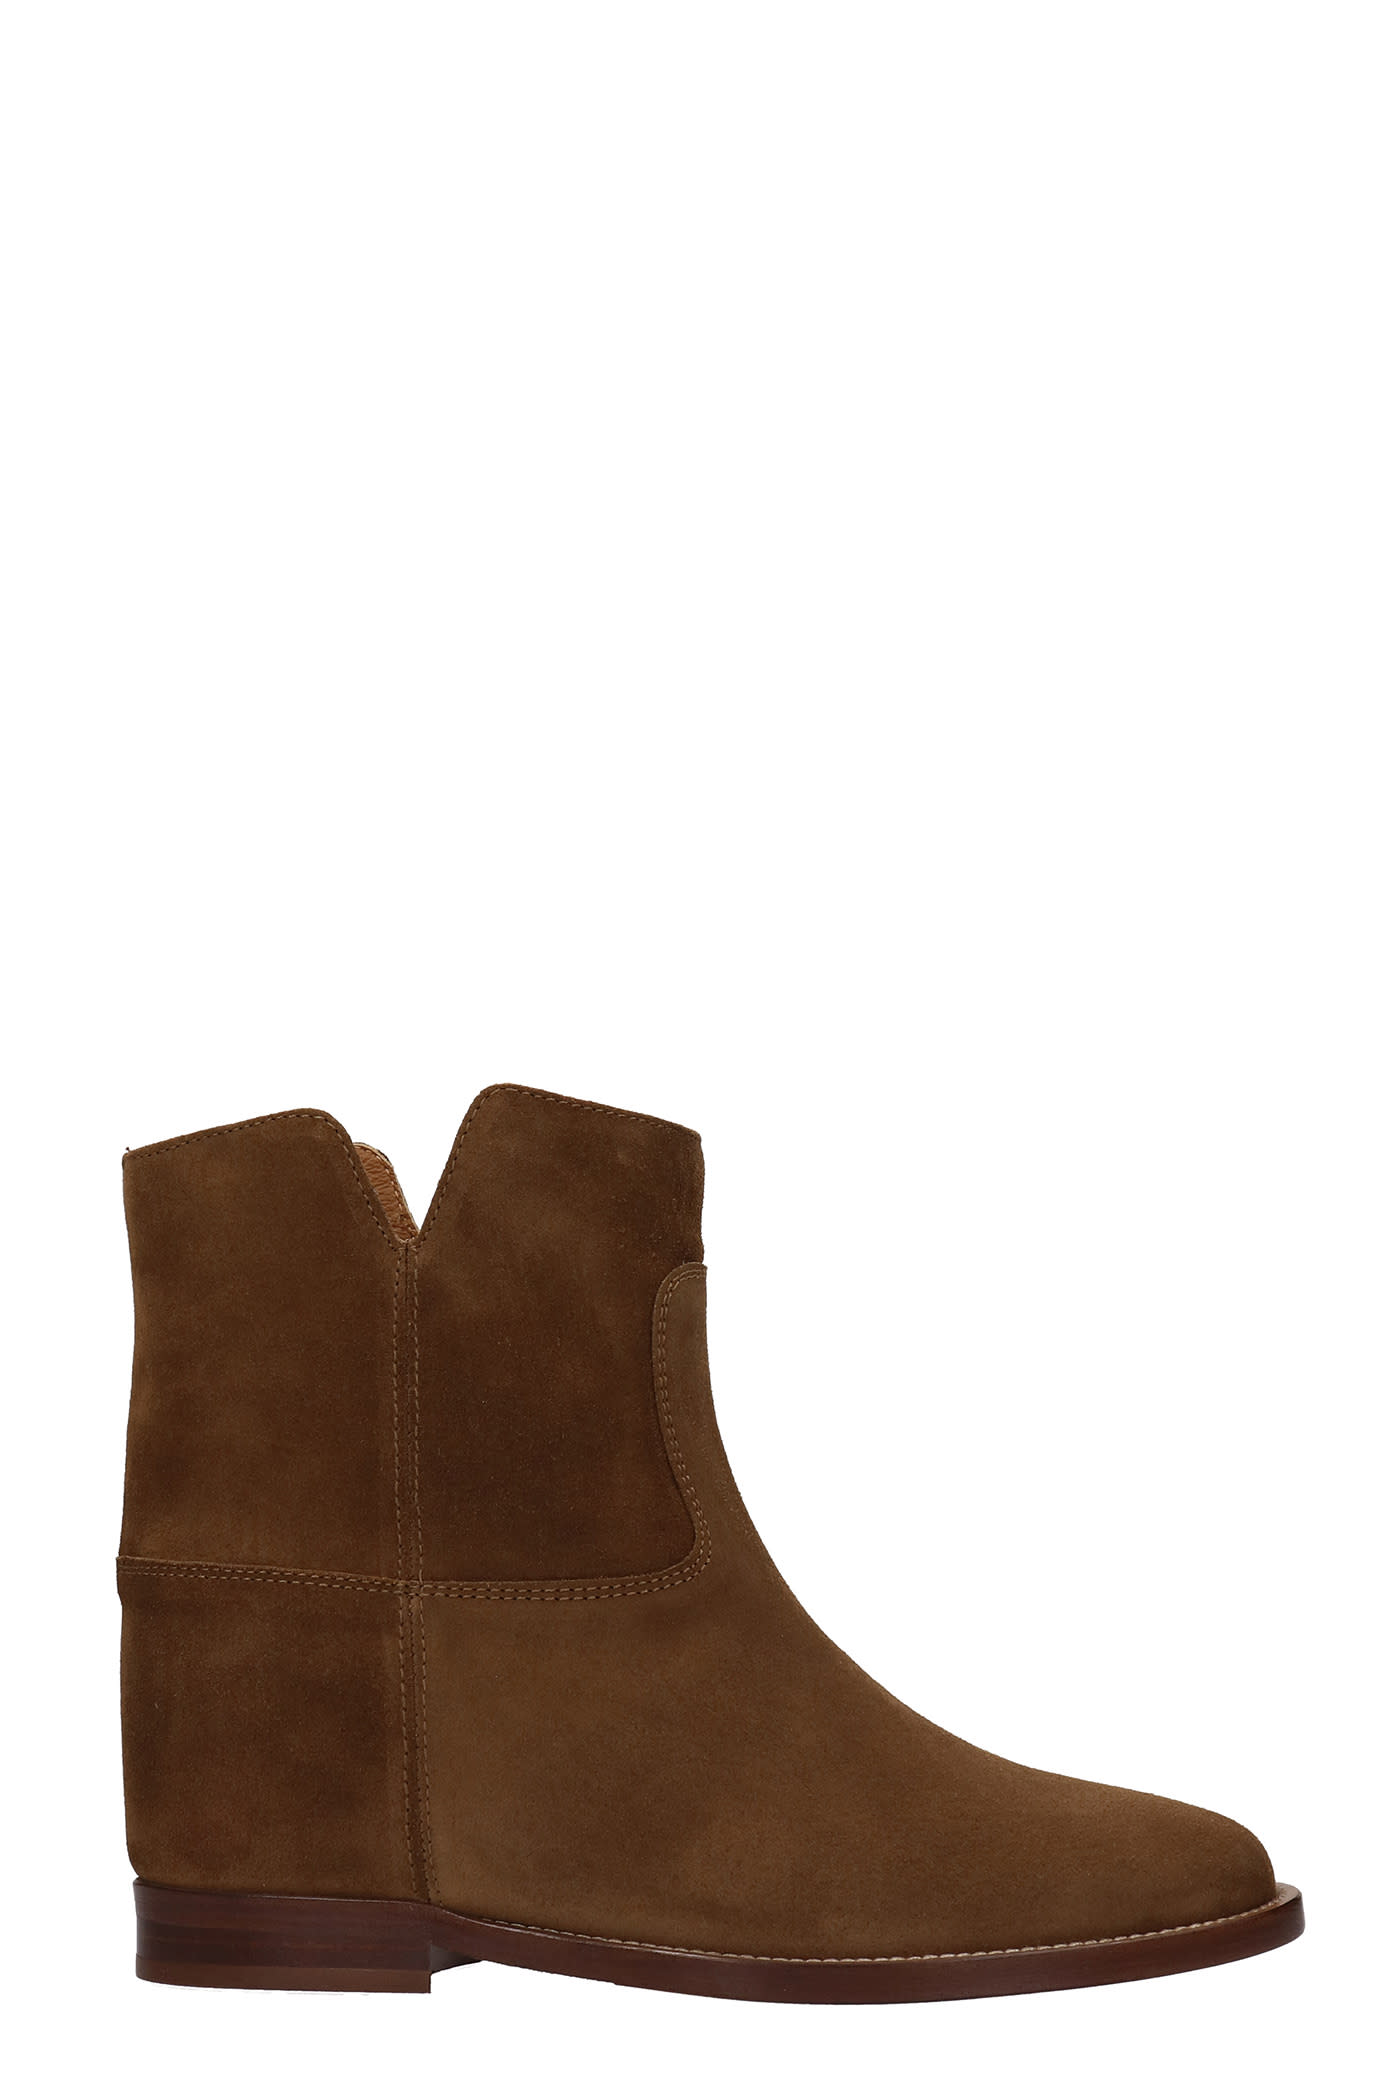 Via Roma 15 Ankle Boots Inside Wedge In Leather Color Suede